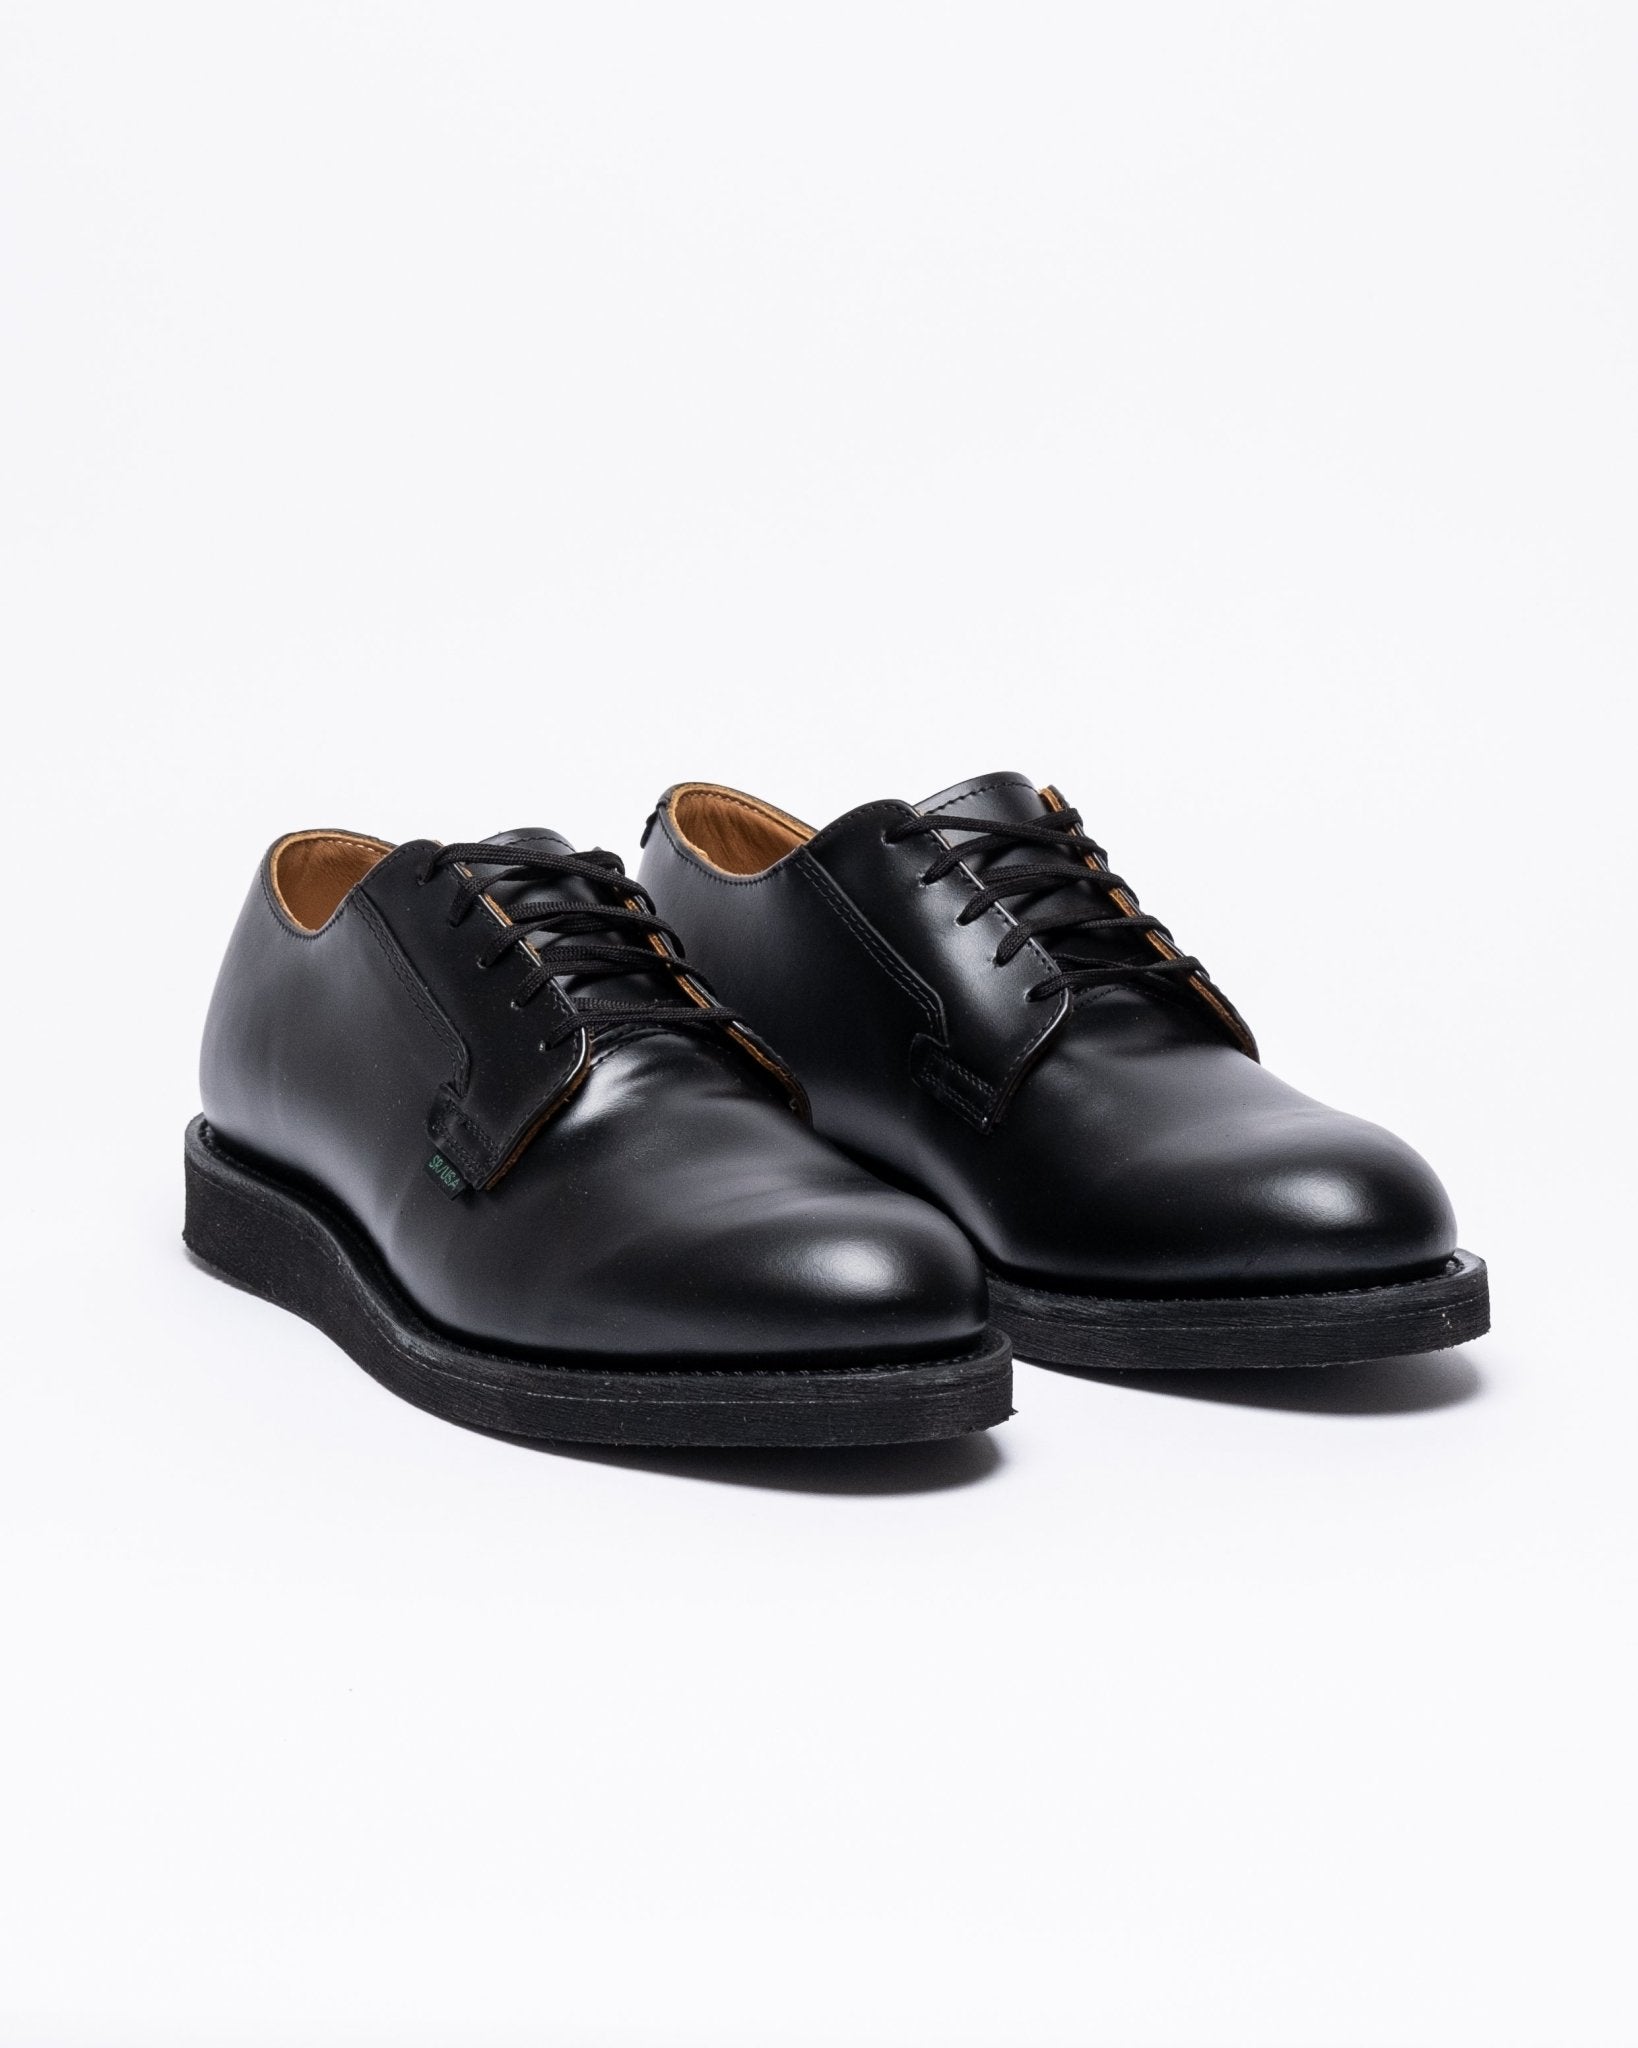 Postman Oxford 101 Black Chaparral Leather - Meadow of Malmö